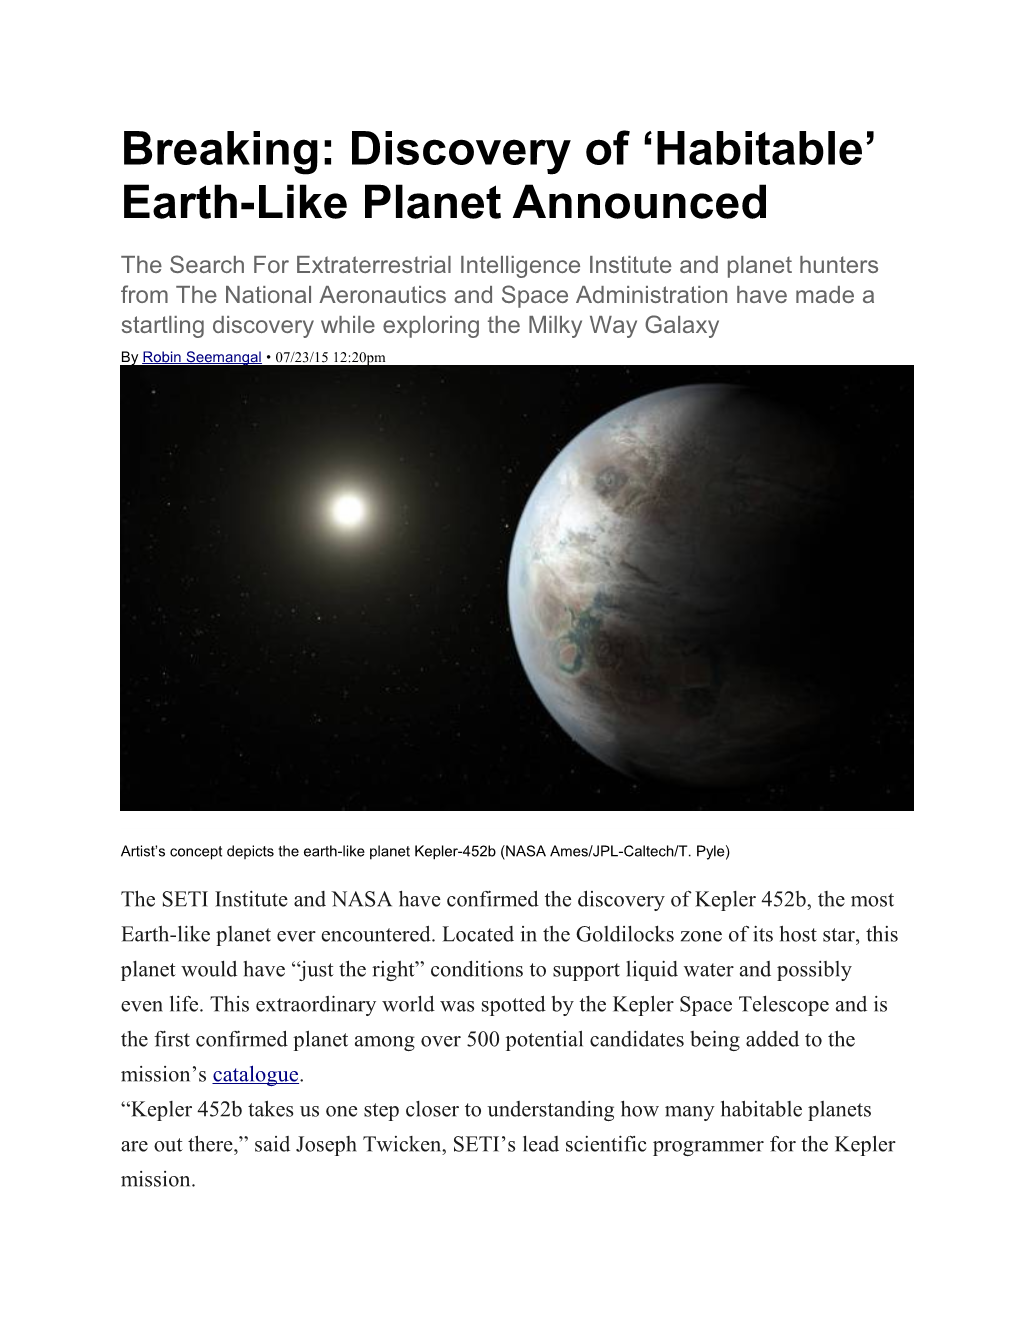 Breaking: Discovery of Habitable Earth-Like Planet Announced